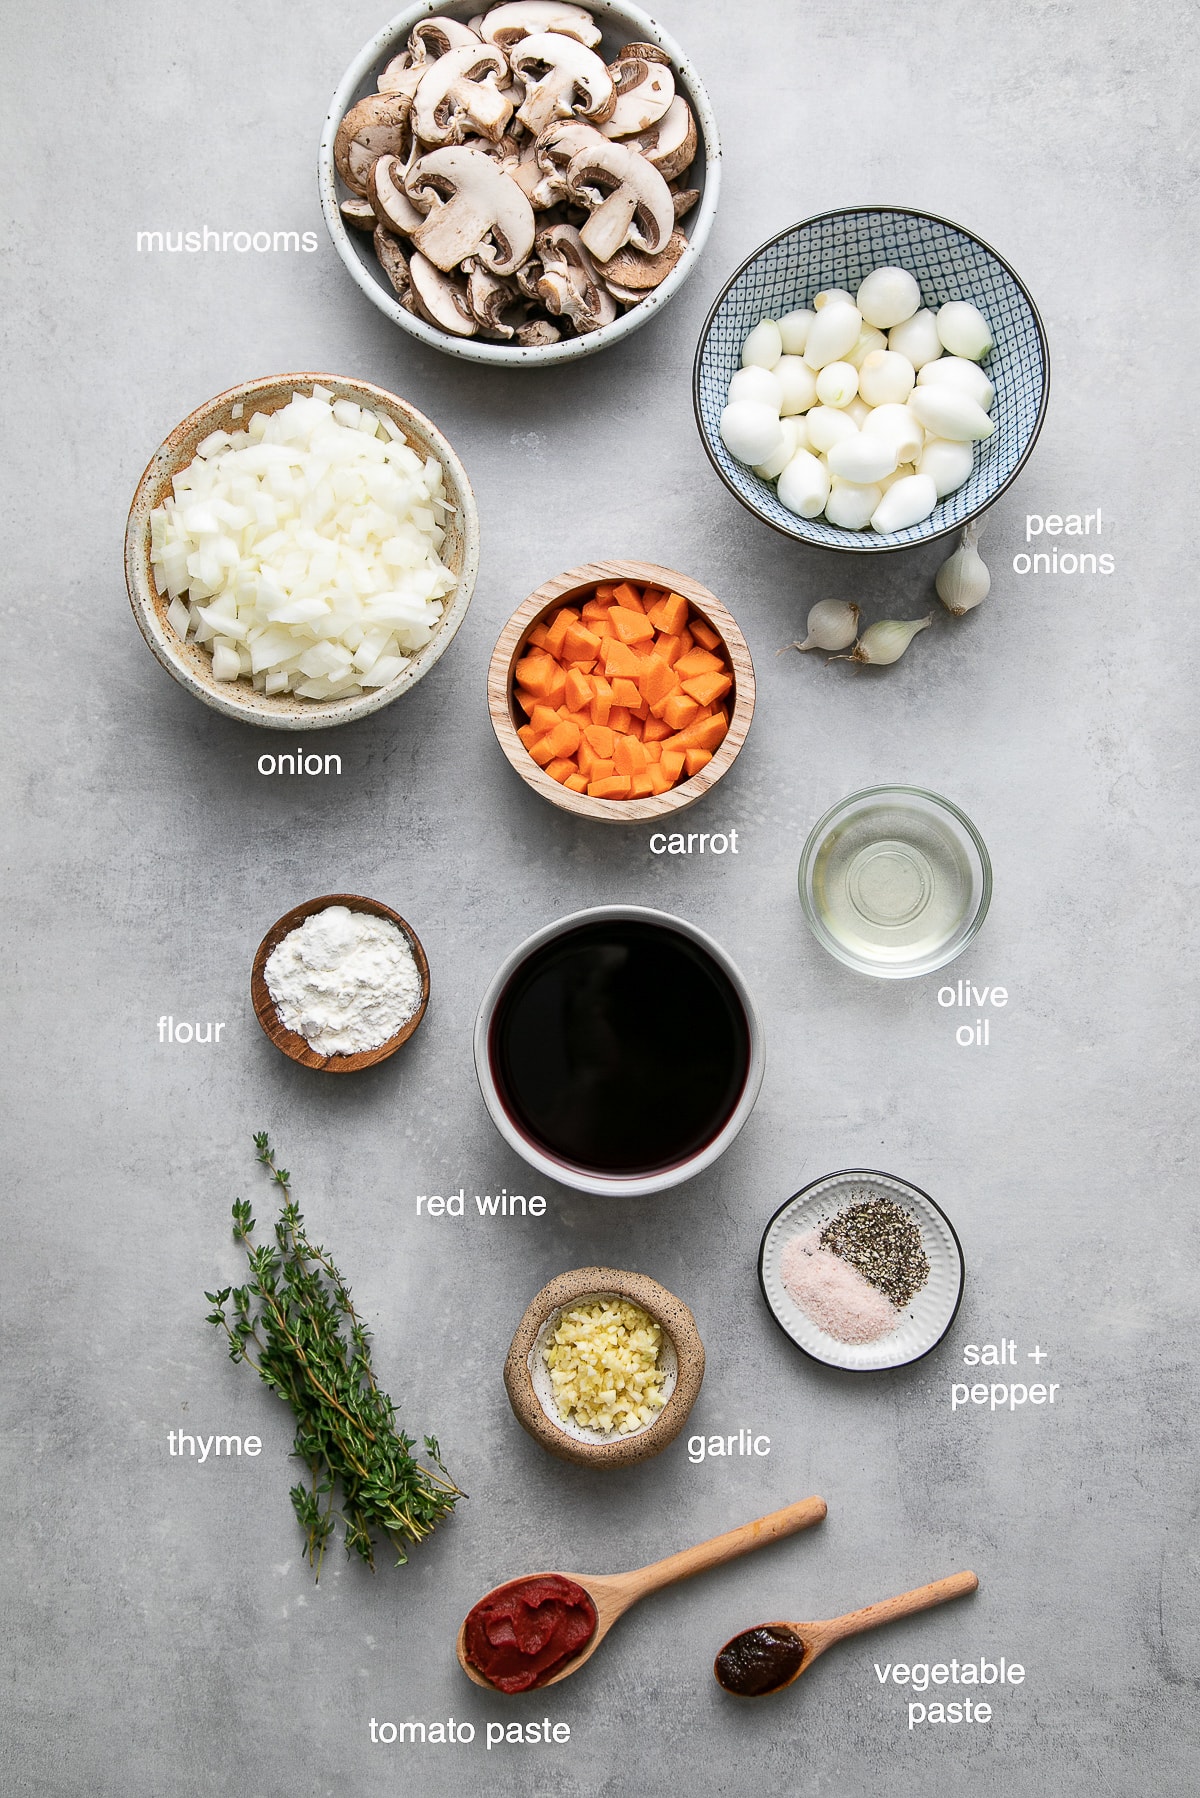 top down view of the ingredients used to make easy mushroom bourguignon.